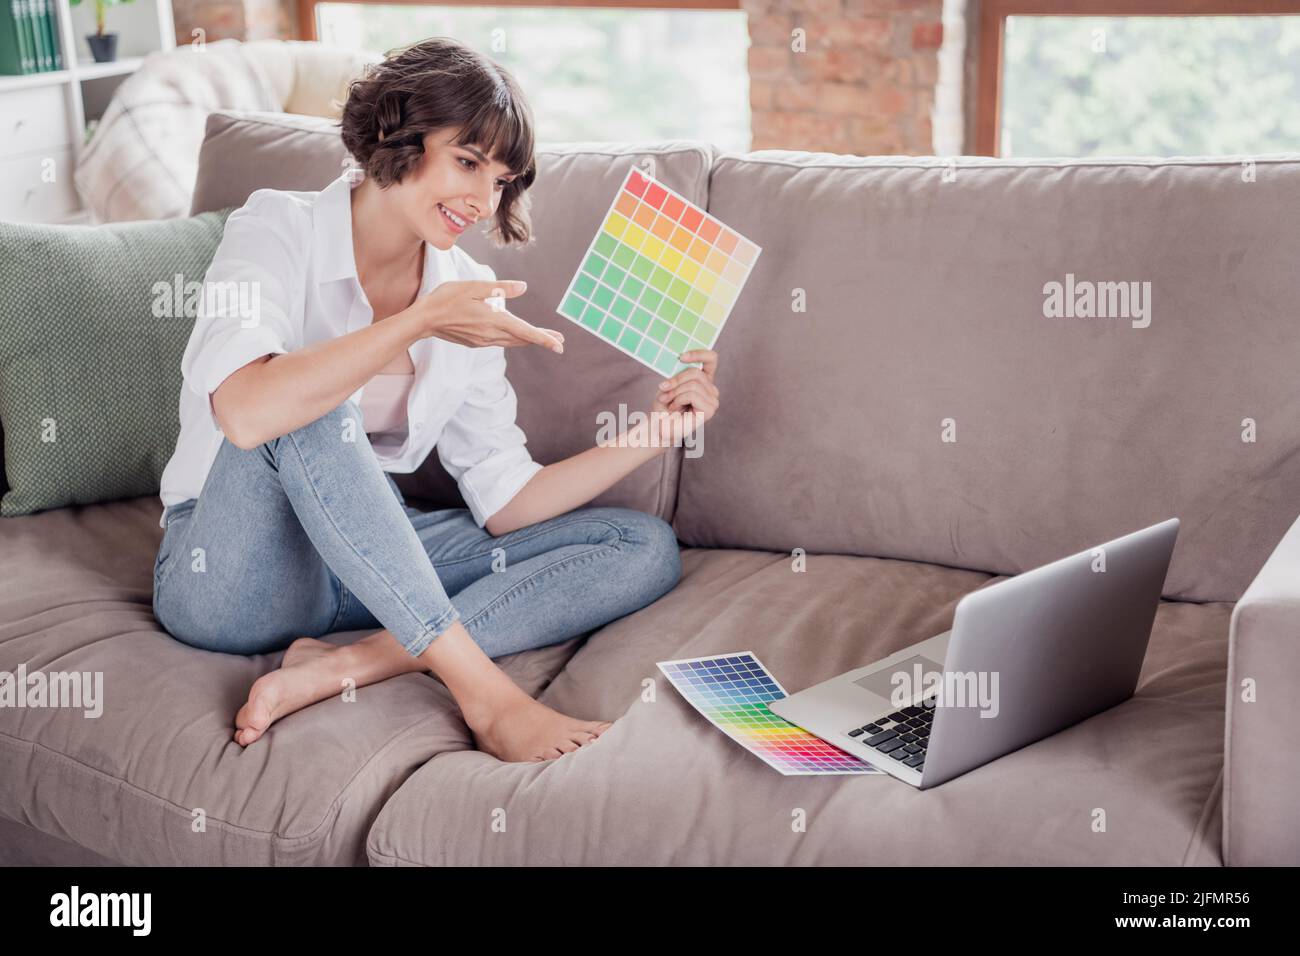 Full length body size photo female graphic designer using laptop showing color palettes on video connection Stock Photo